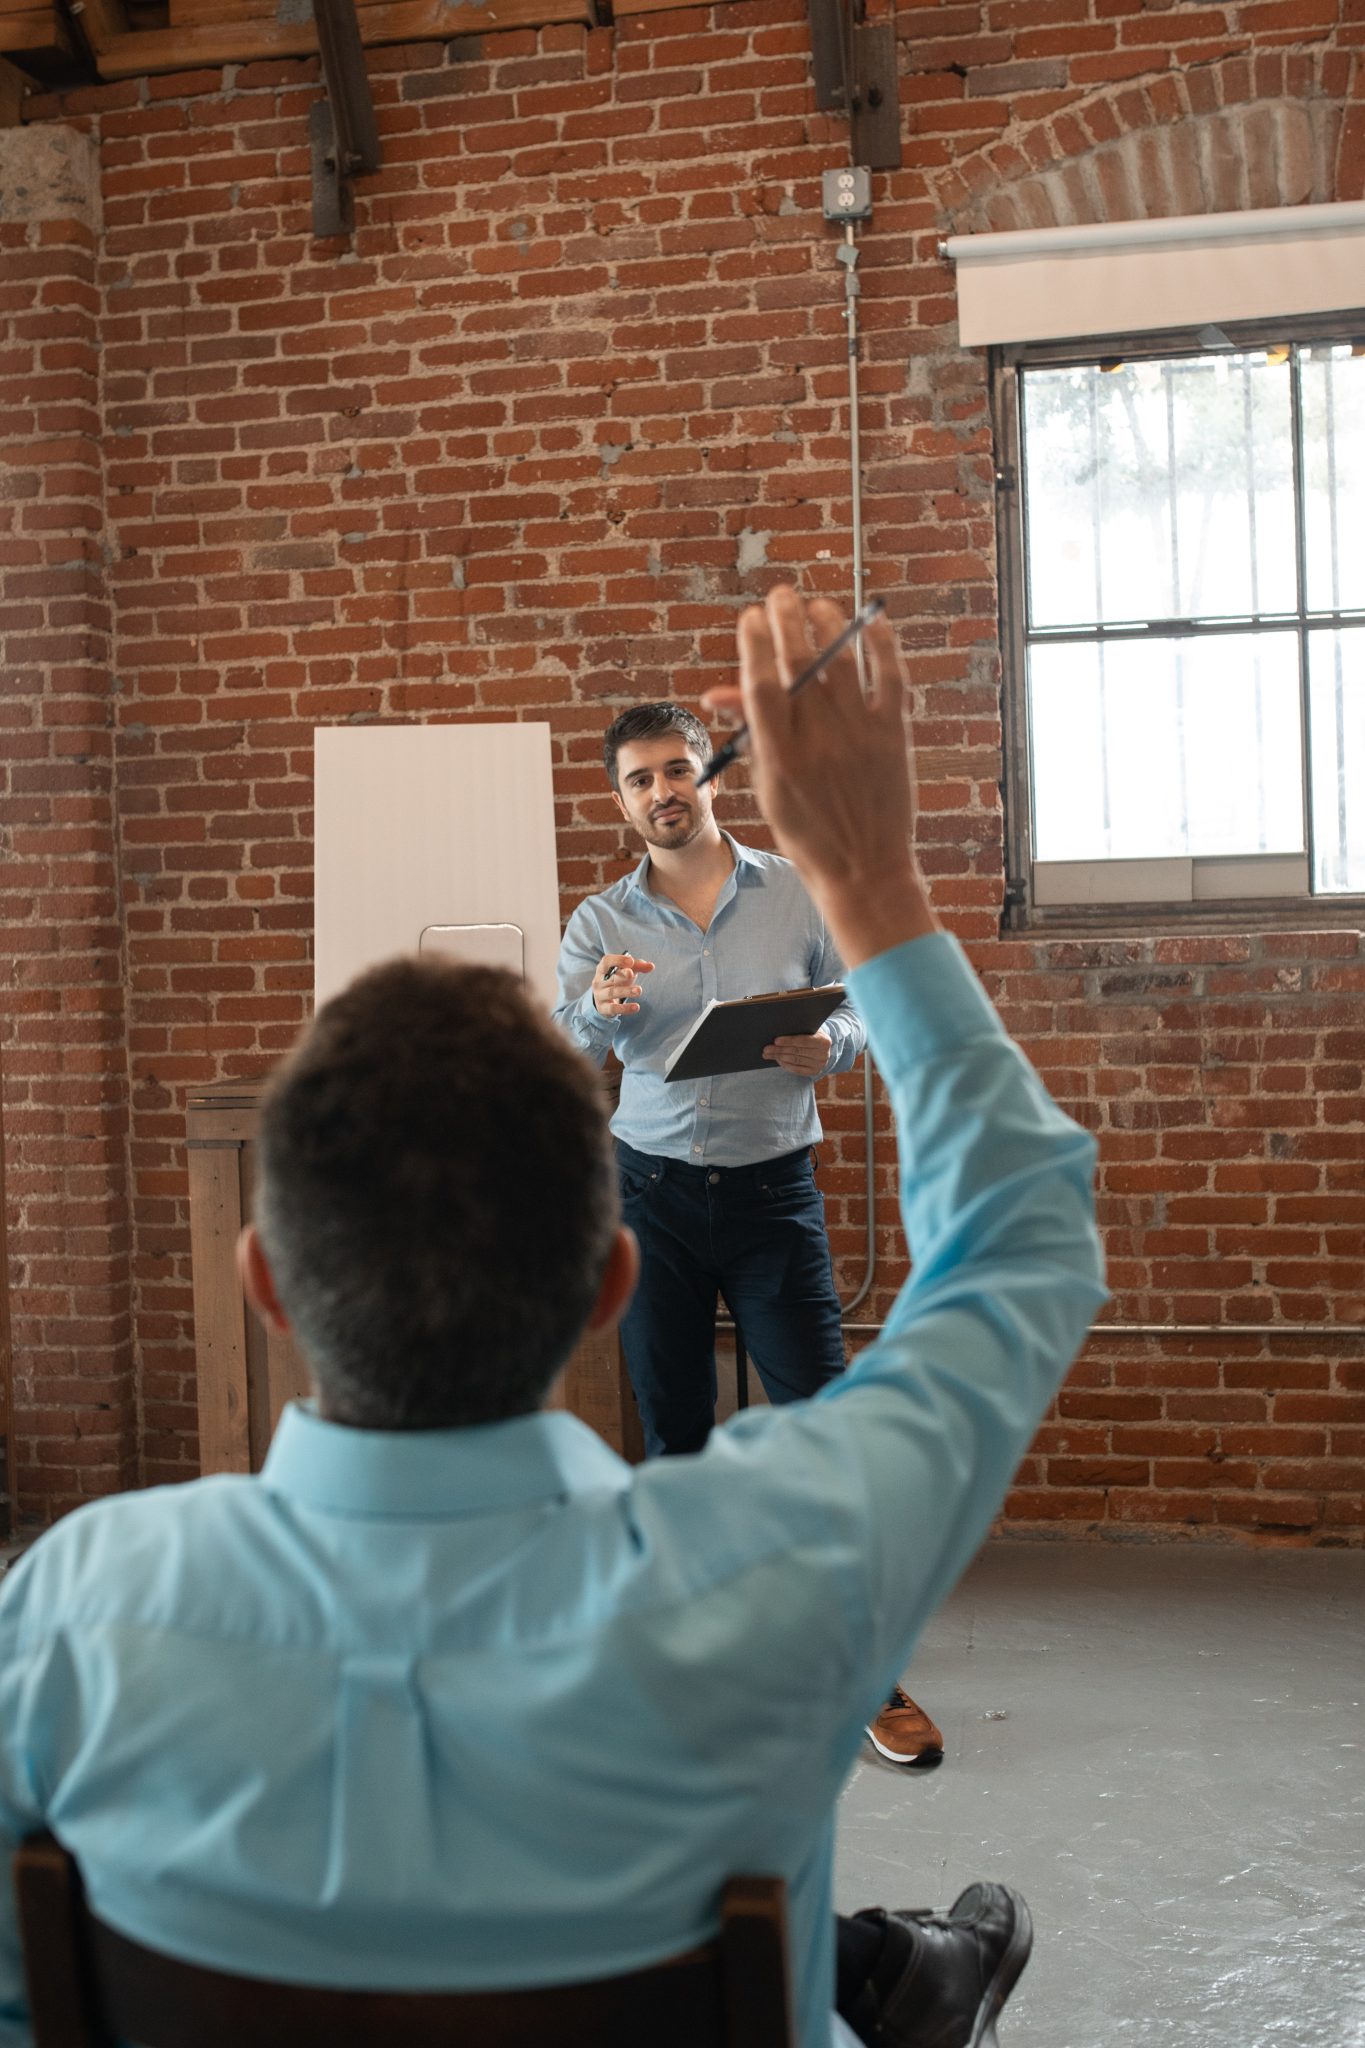 man standing calling on person with hand raised